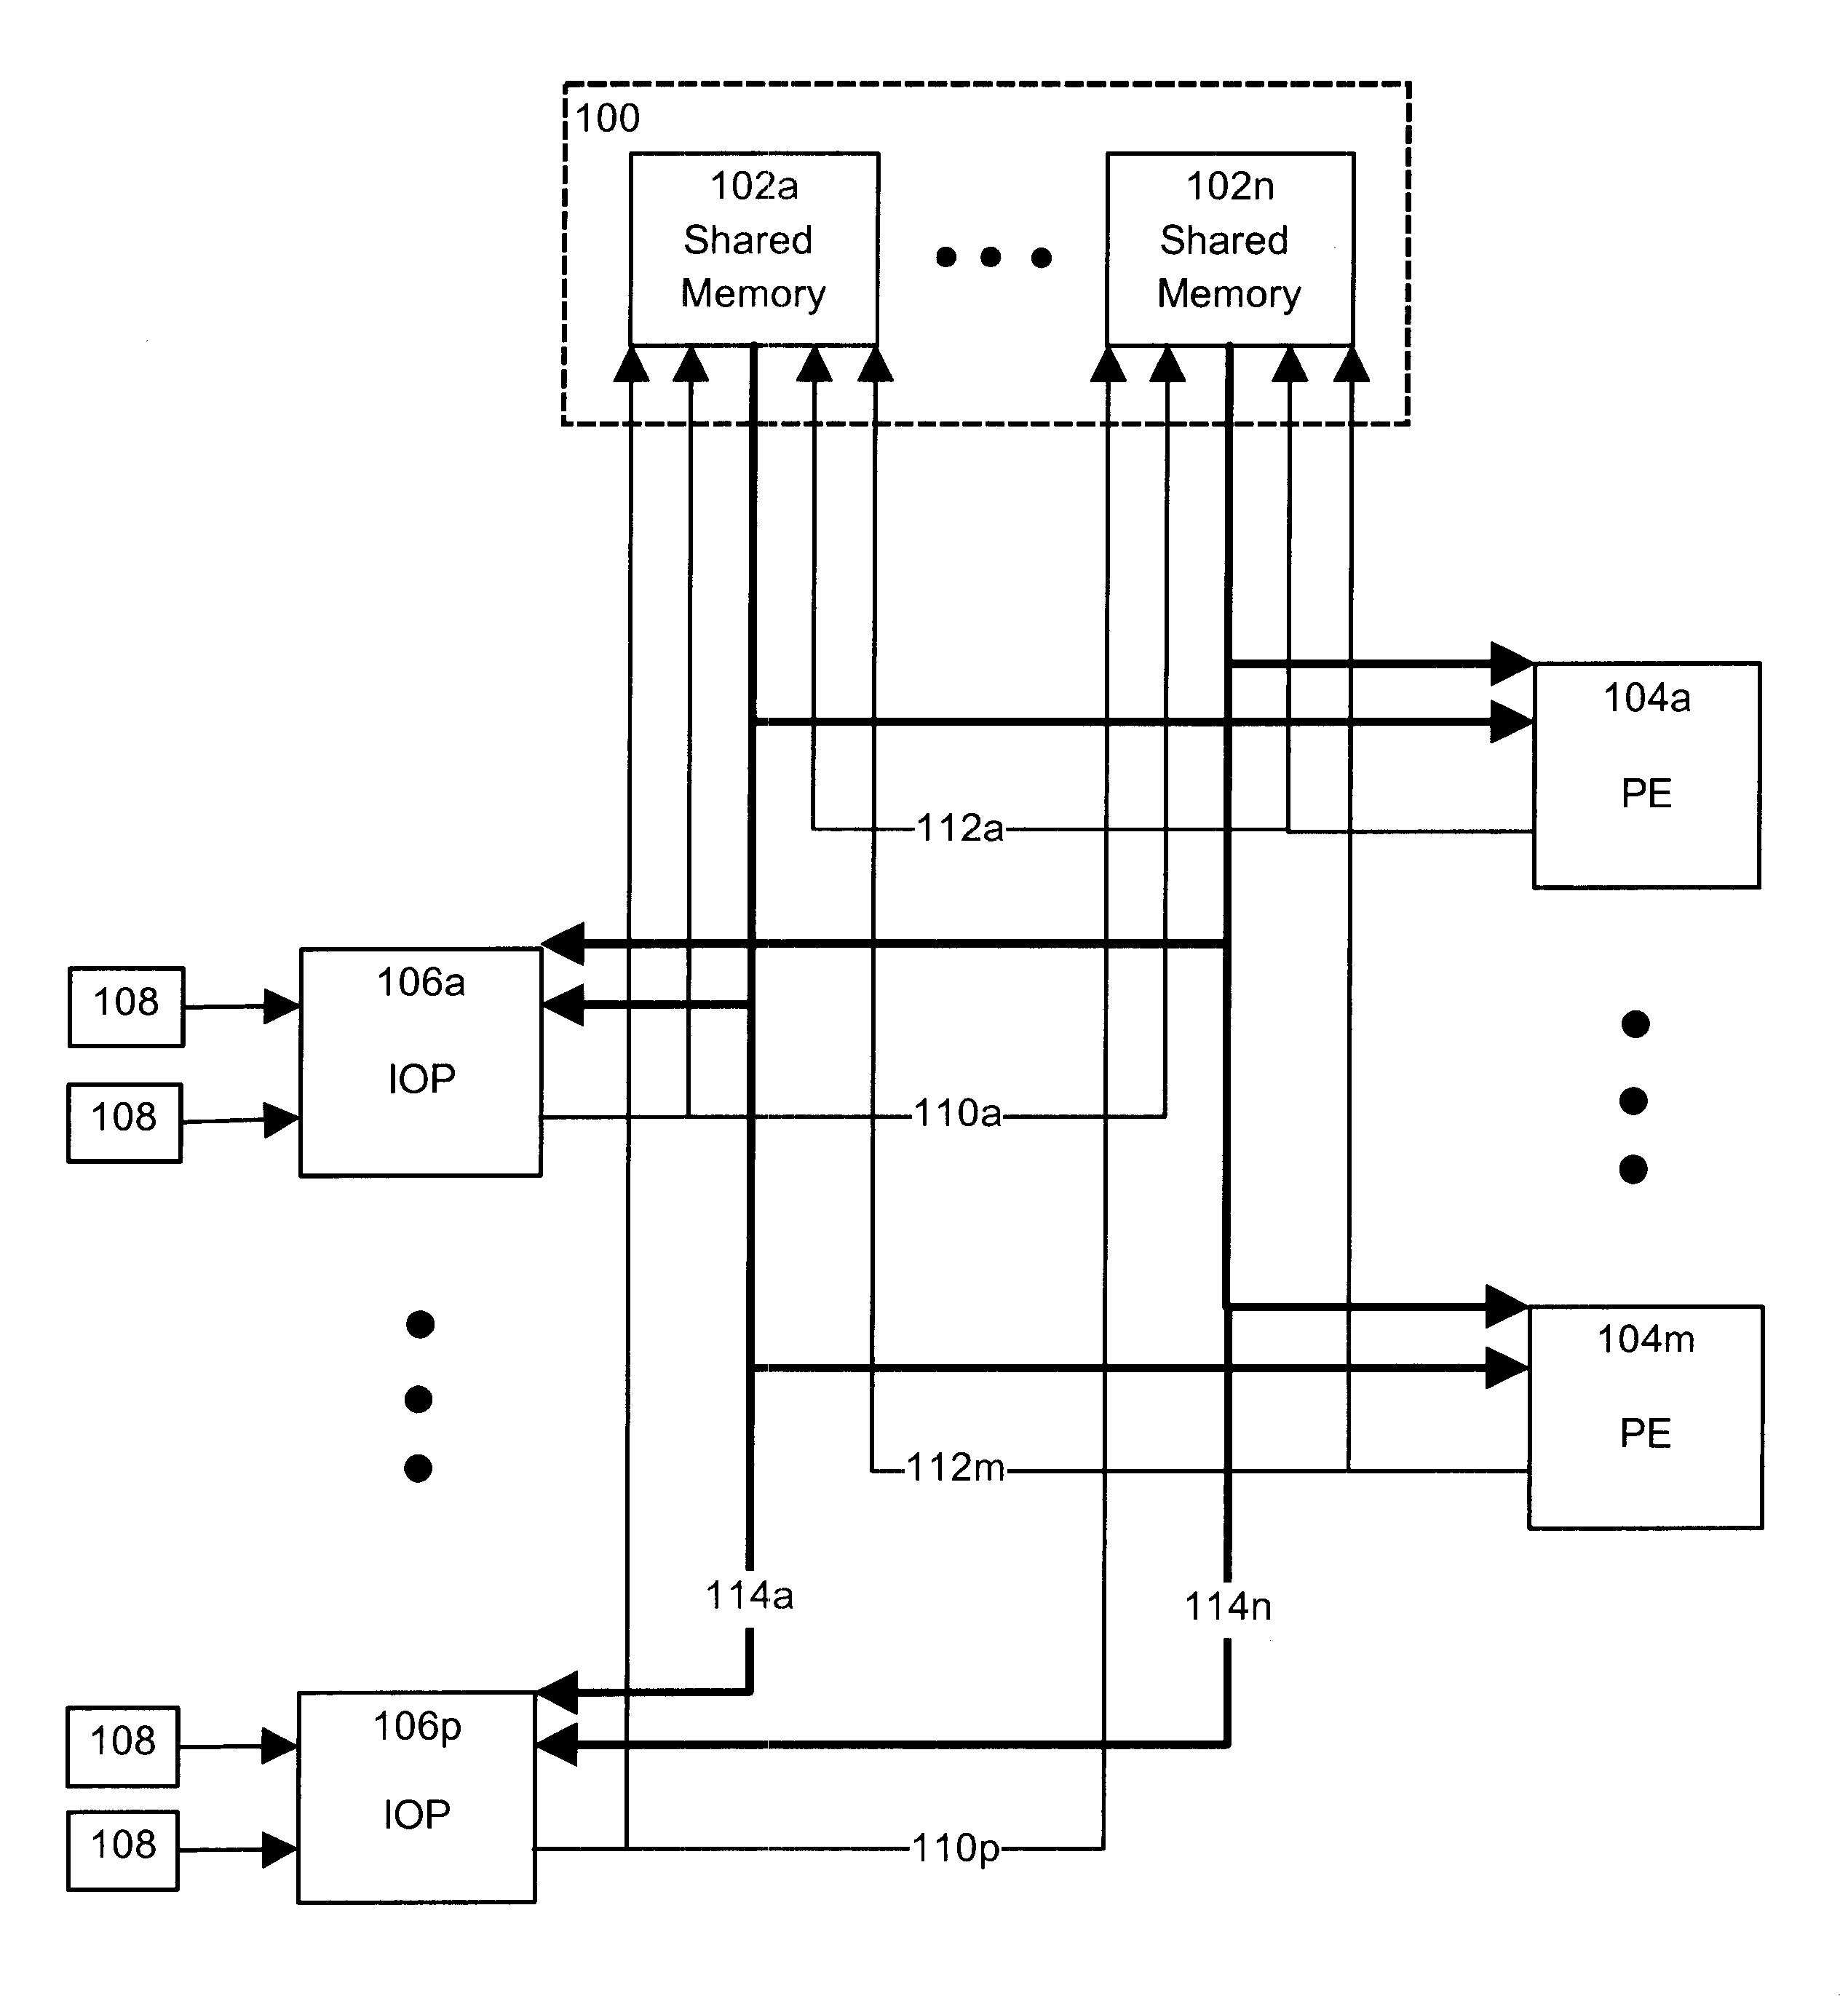 Method and apparatus for exchanging data between transactional and non-transactional input/output systems in a multi-processing, shared memory environment